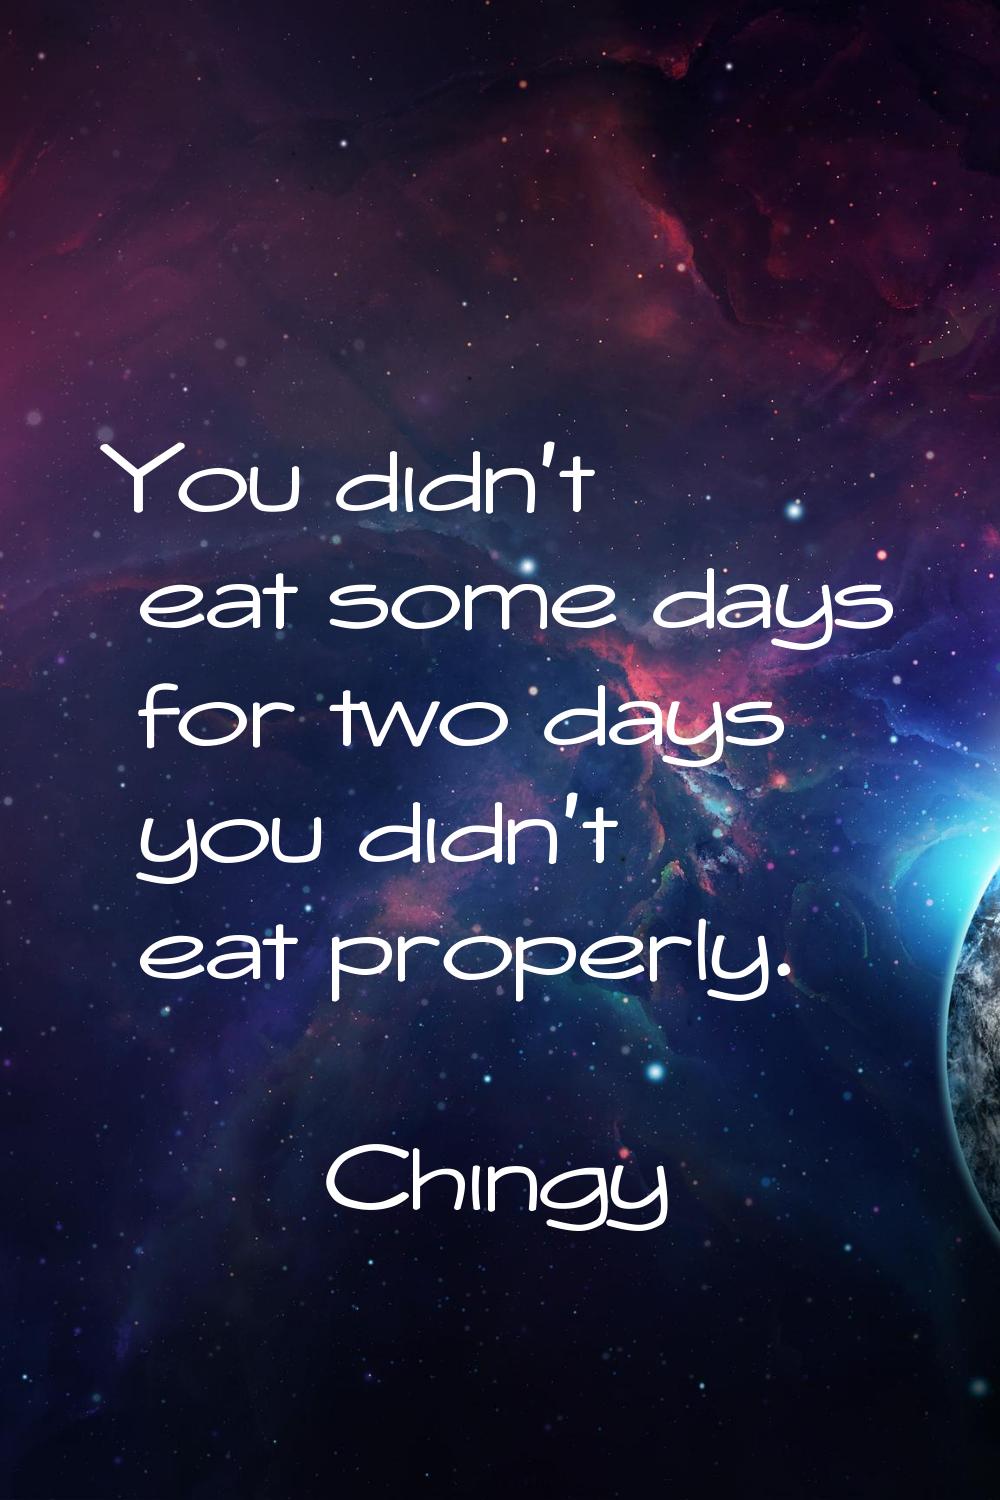 You didn't eat some days for two days you didn't eat properly.